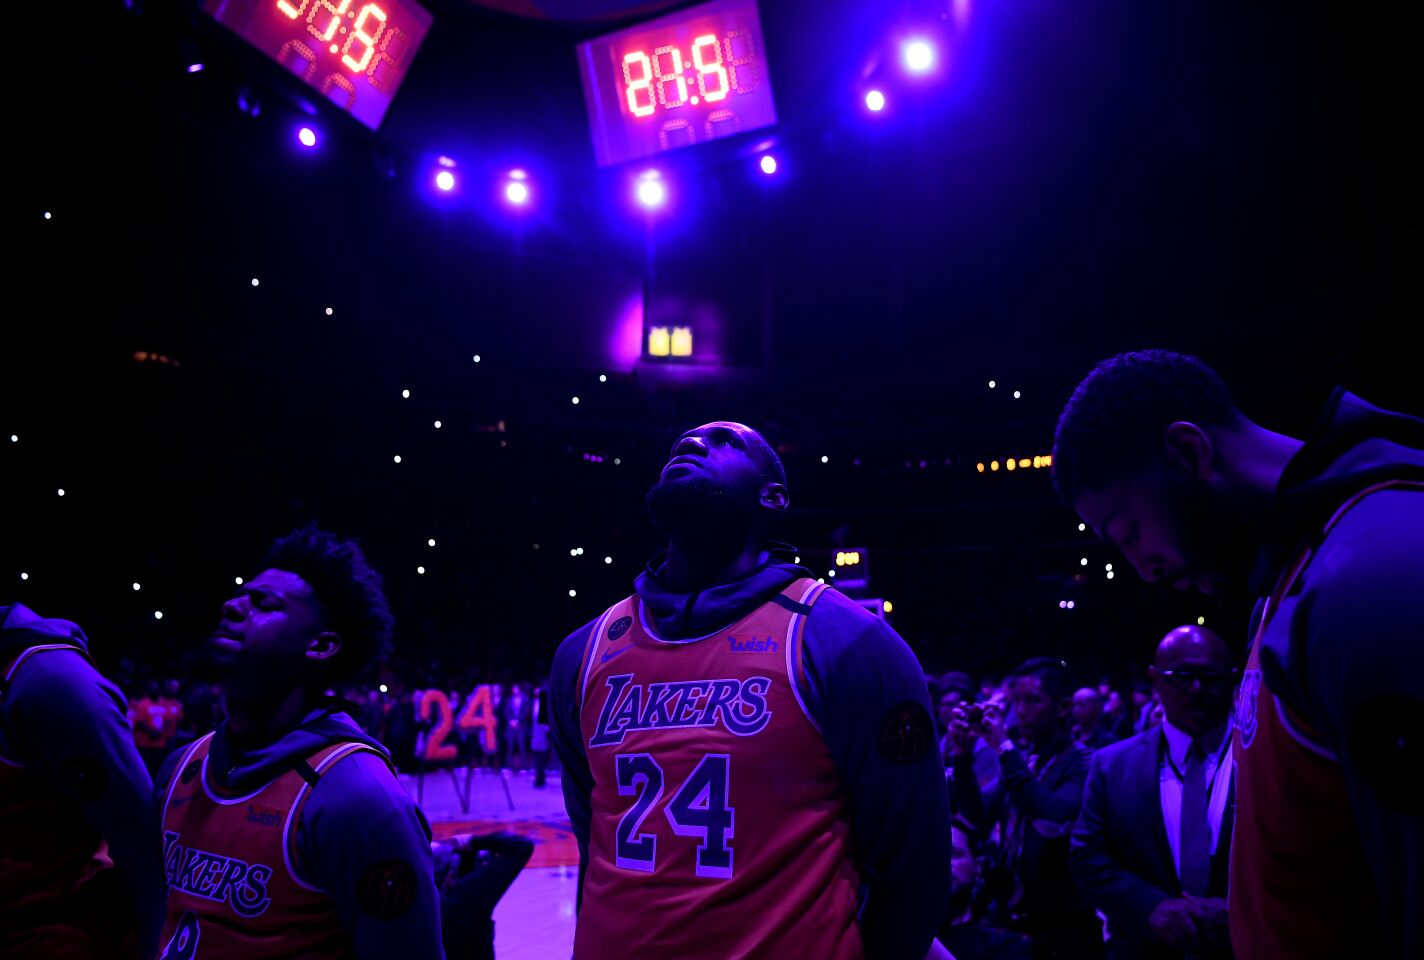 Lakers star LeBron James watches the 24 second clock wind down to honor Kobe Bryant during a ceremony at the Staples Center on Jan. 31, 2020.